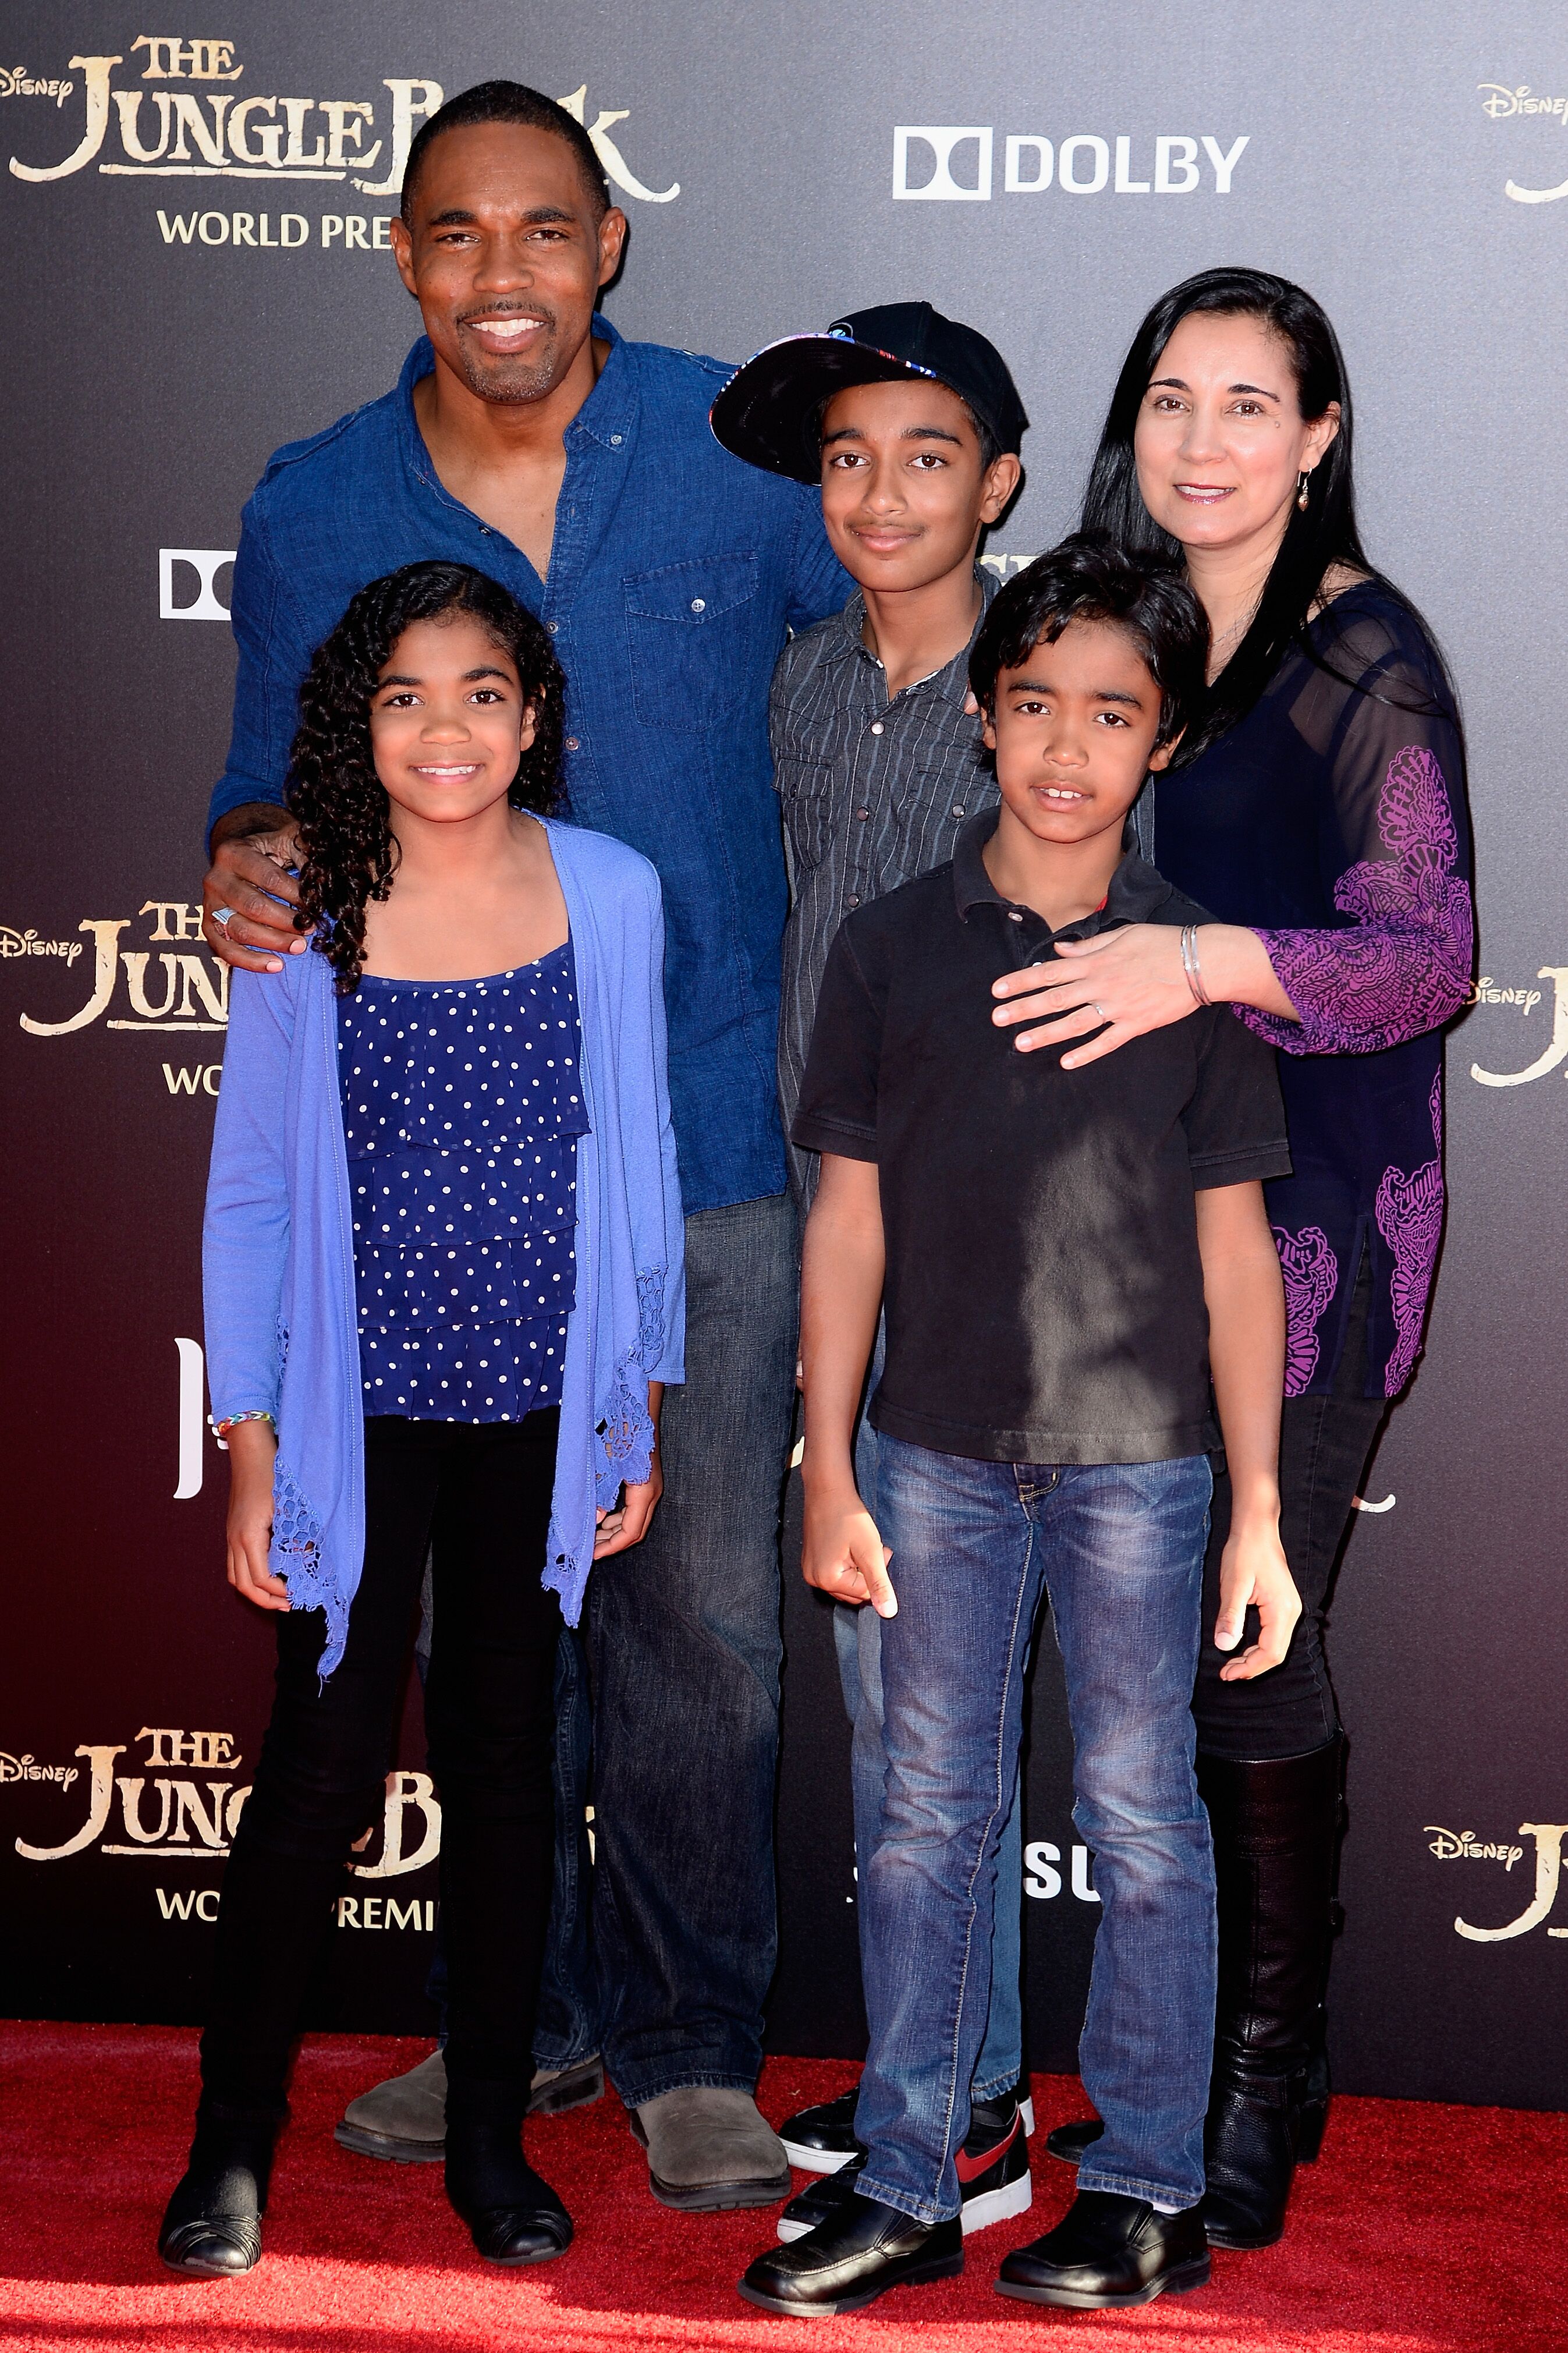 Jason George with wife Vandana Khanna and children Jasmine George, Arun George, Nikhil George, at the El Capitan Theatre on April 4, 2016 in Hollywood, California. | Source: Getty Images